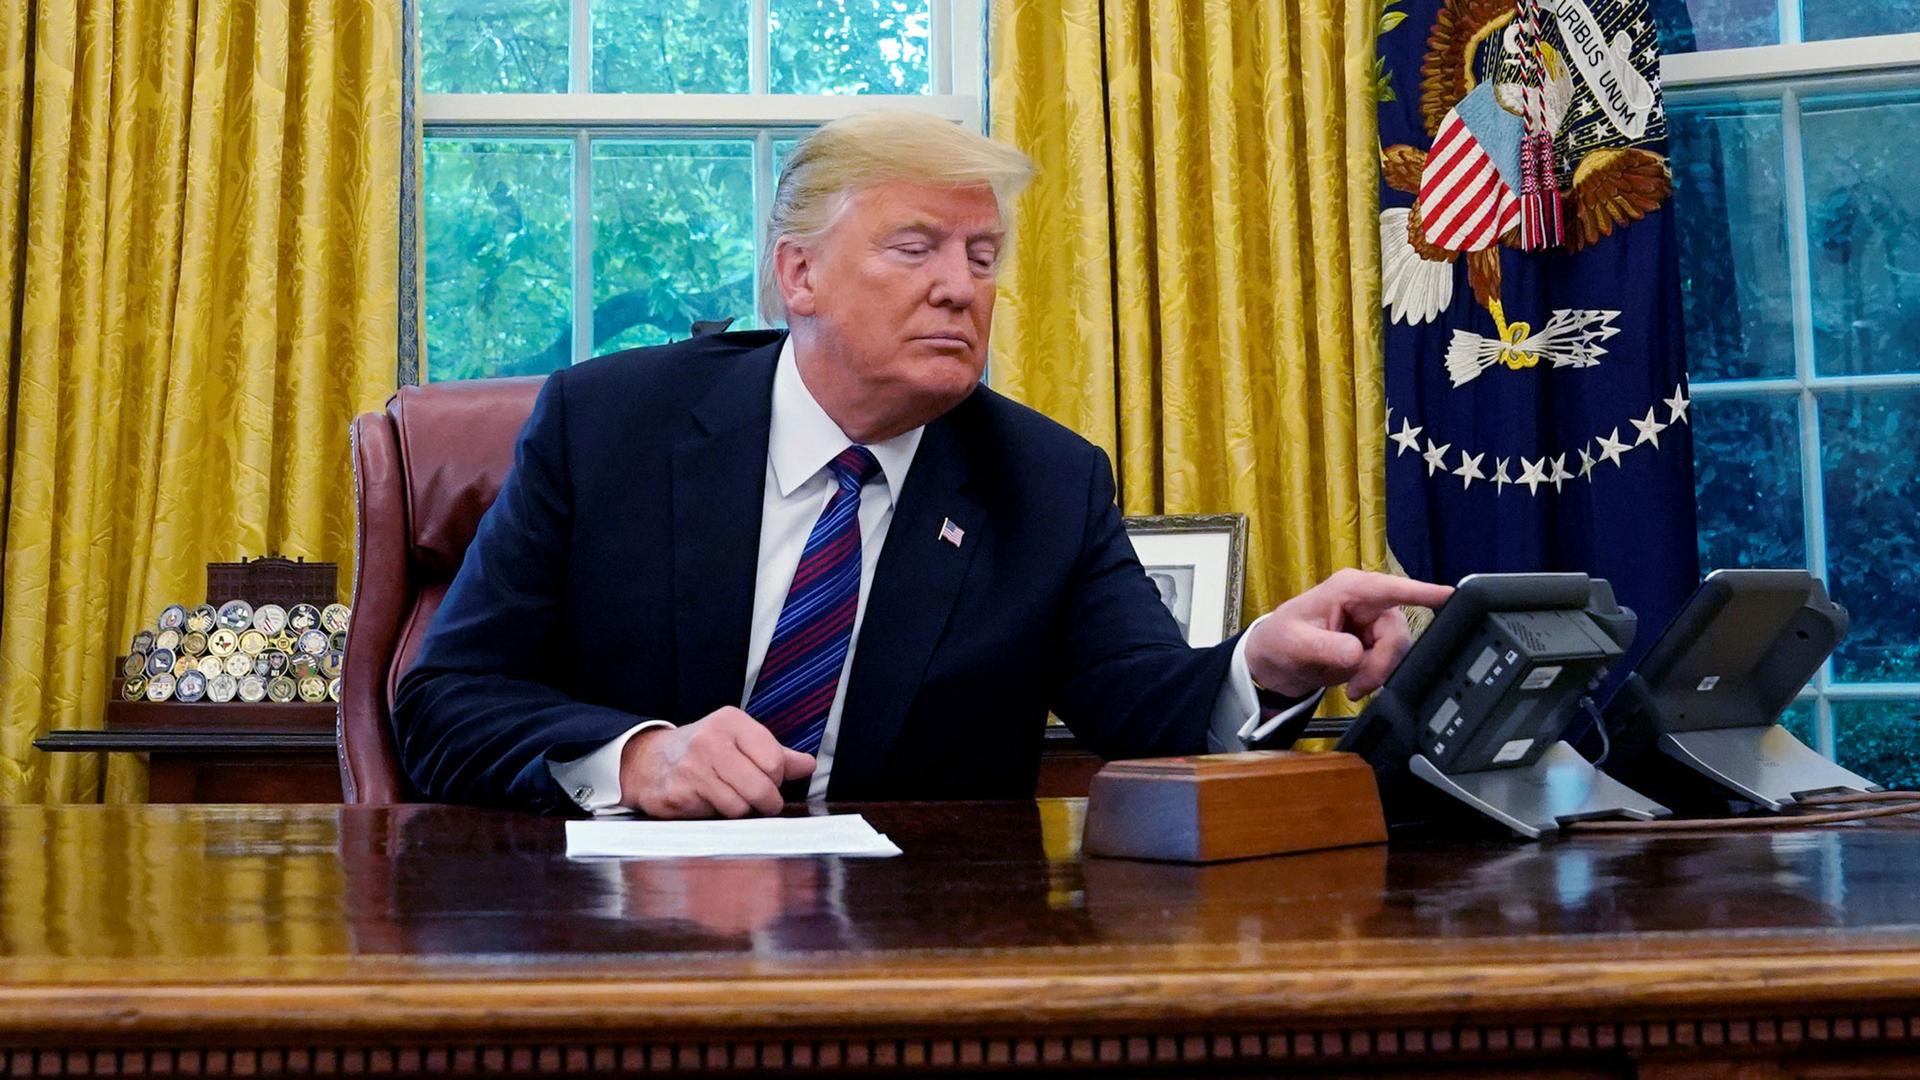 President Donald Trump is shown at his desk in the oval office talking via speakerphone.